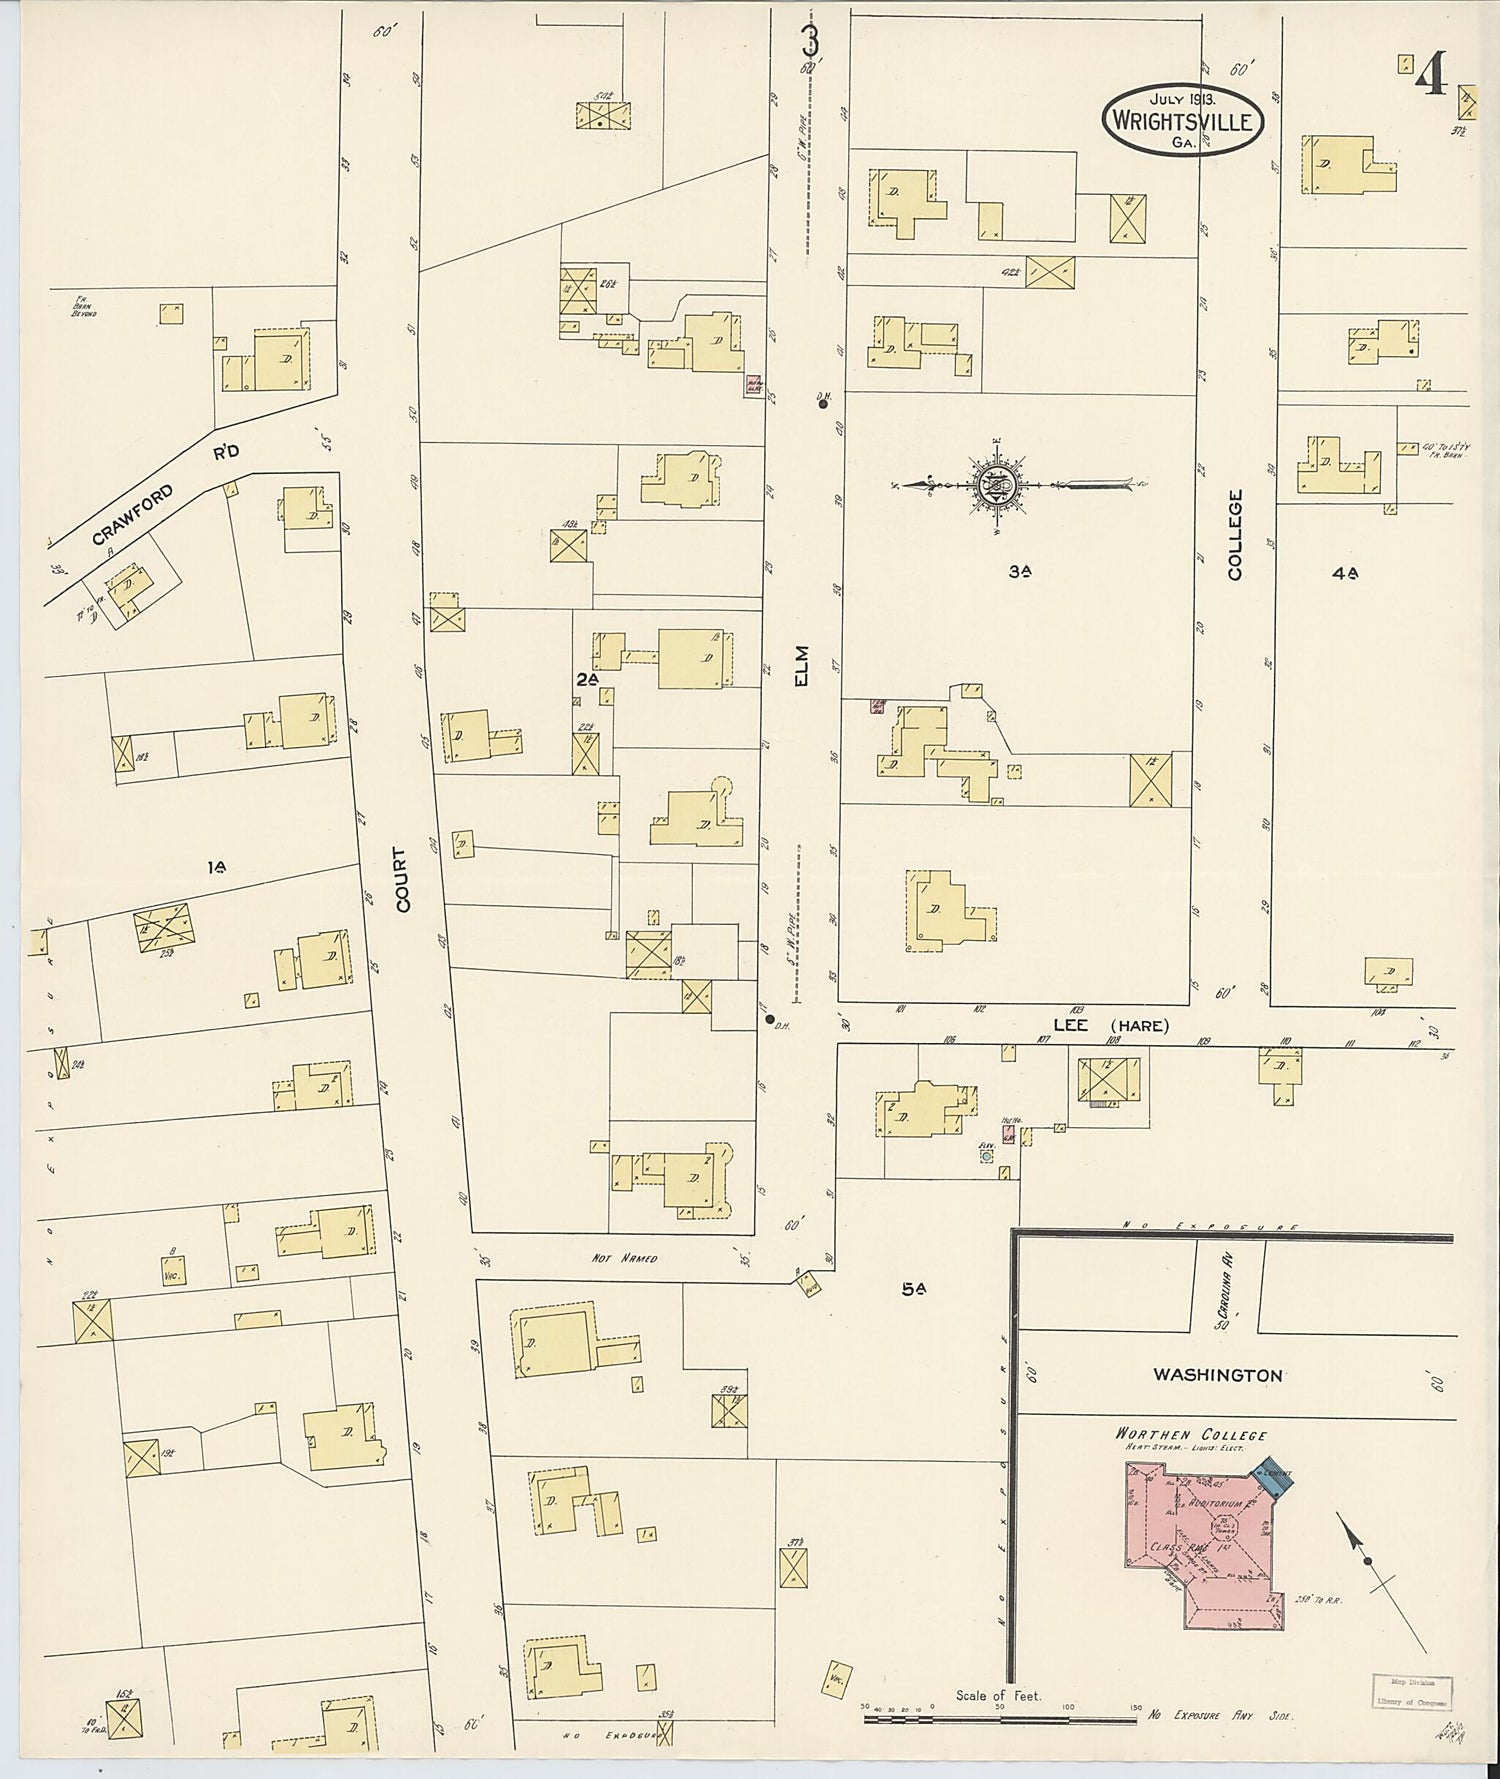 This old map of Wrightsville, Johnson County, Georgia was created by Sanborn Map Company in 1913